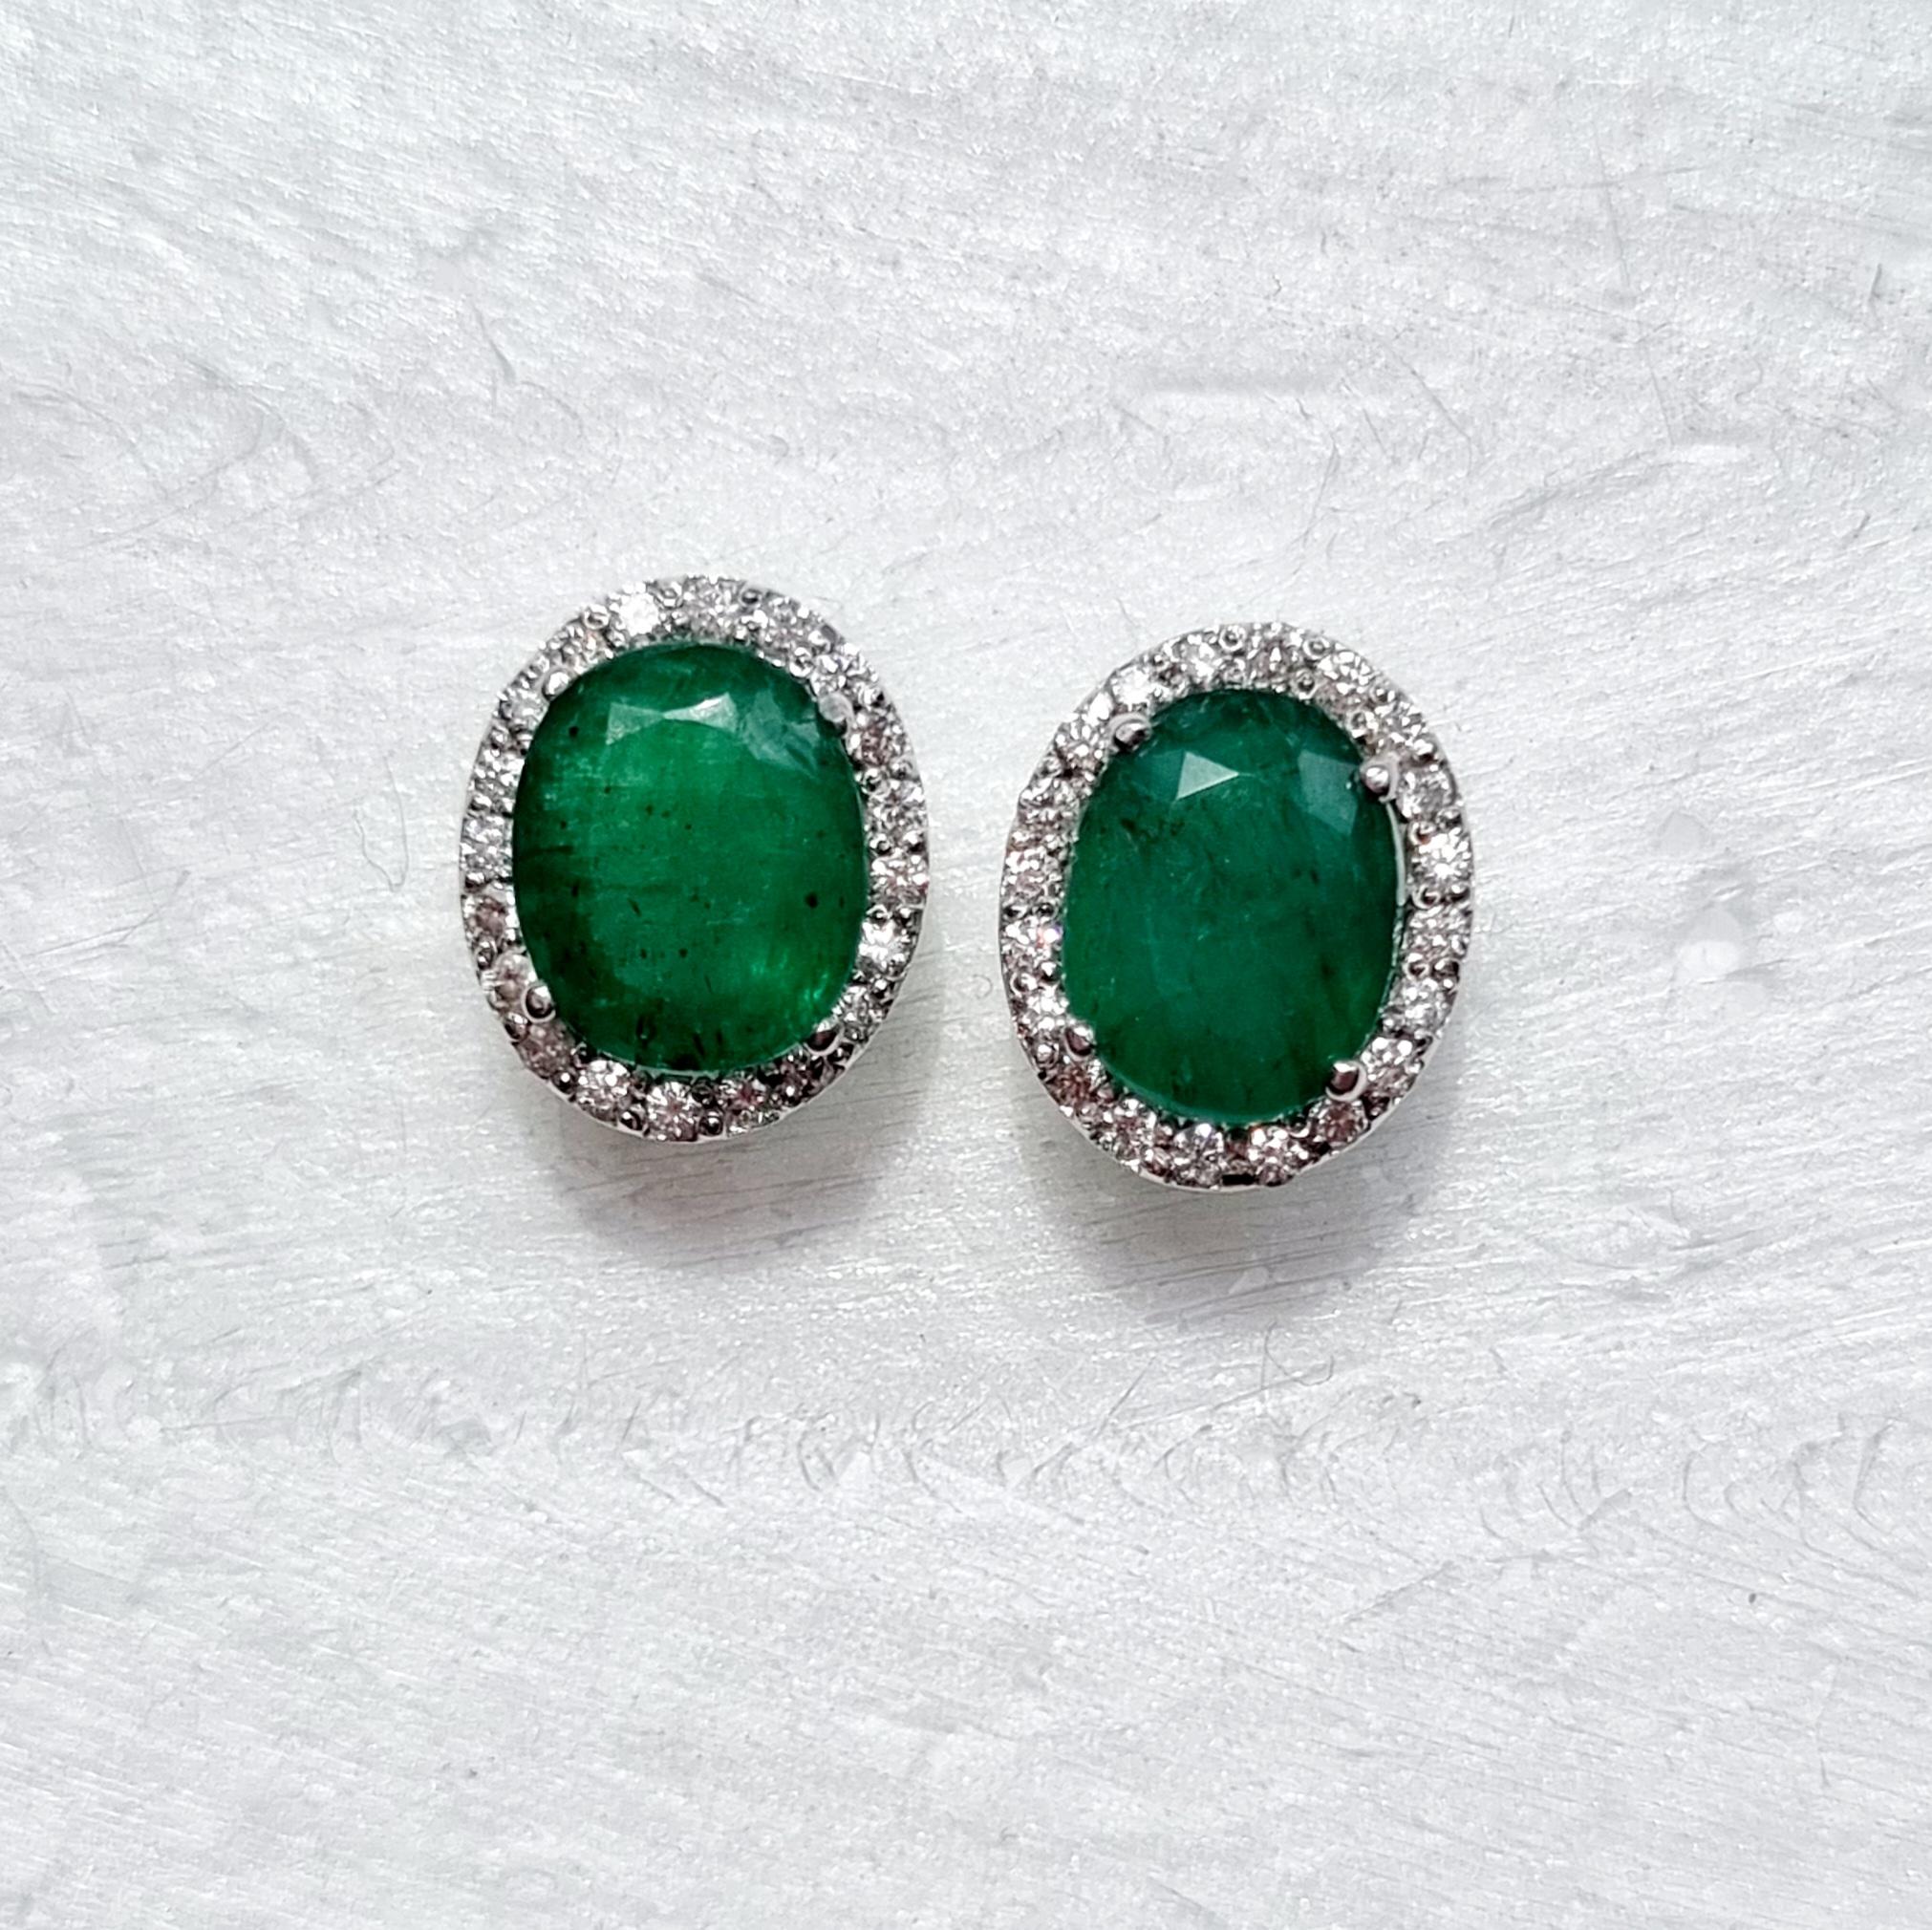 Halo Emerald Wedding Stud Earrings, Vintage Emerald Gold Wedding Earrings, Art Deco Emerald and Diamond Earring, Emerald Statement Earrings

Elegant halo earrings featuring oval cut green emerald & clear white natural diamonds. Heavy 4-prong halo